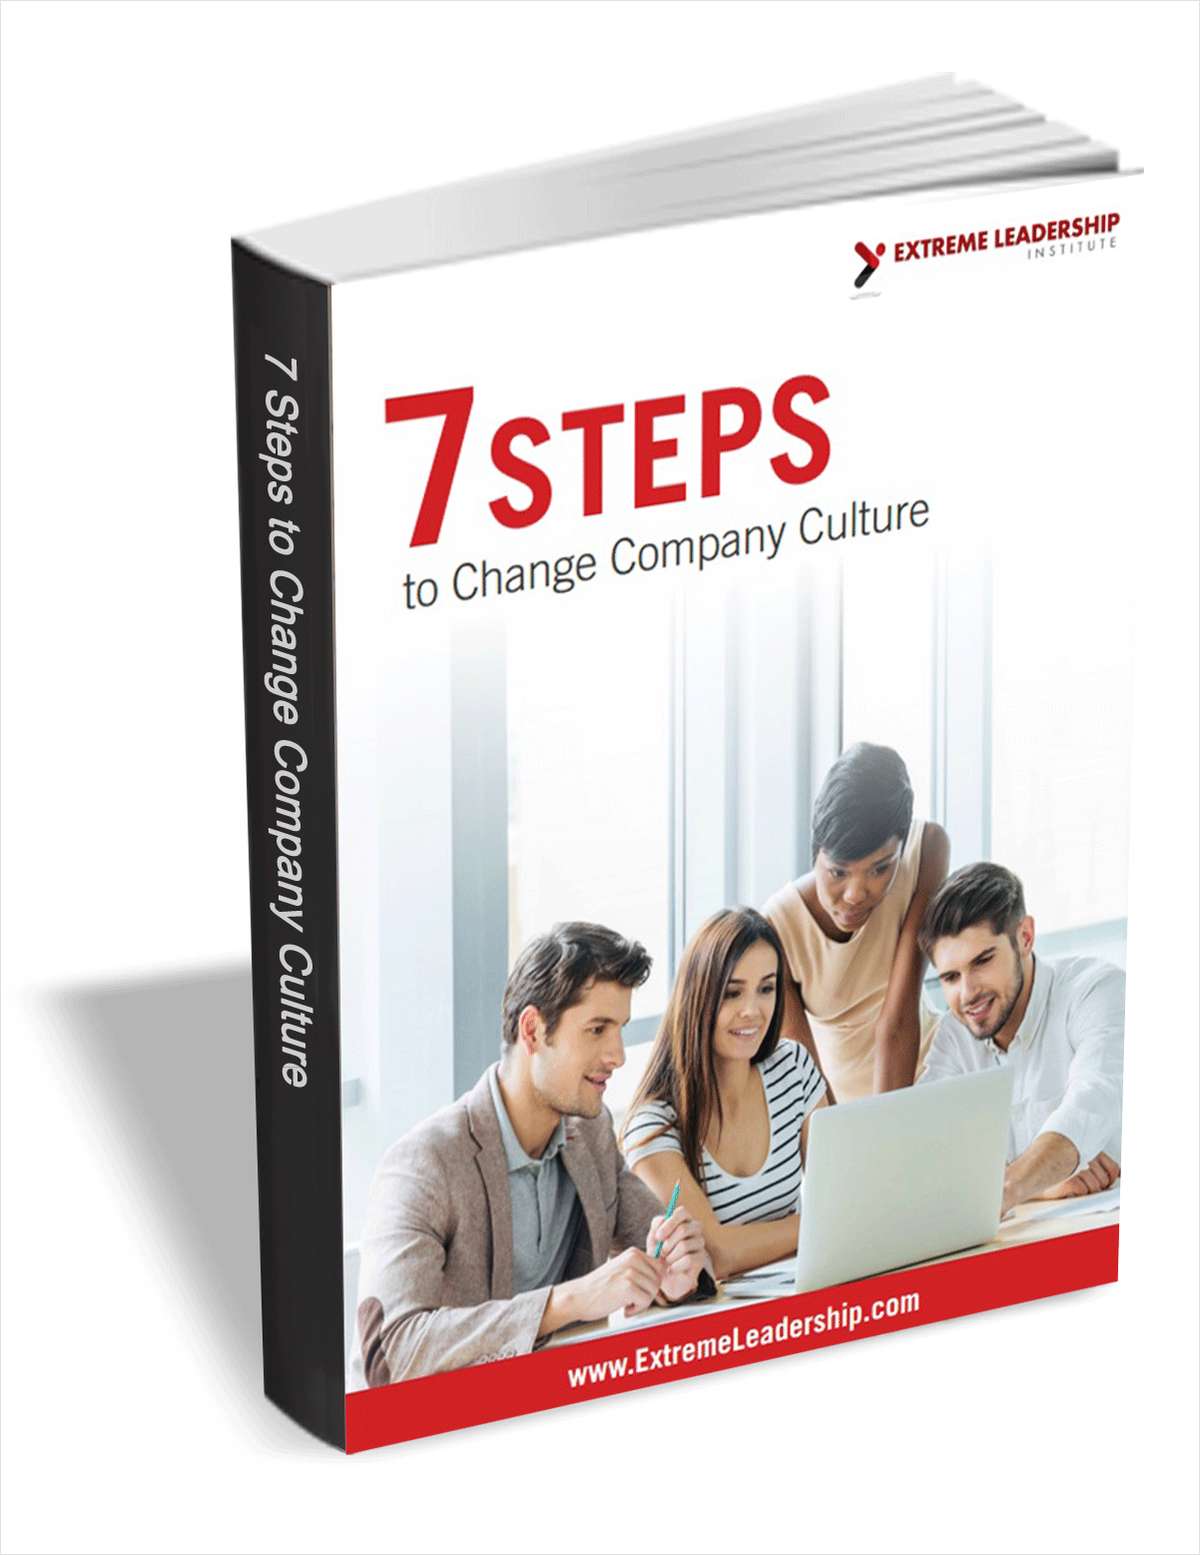 7 Steps to Change Company Culture